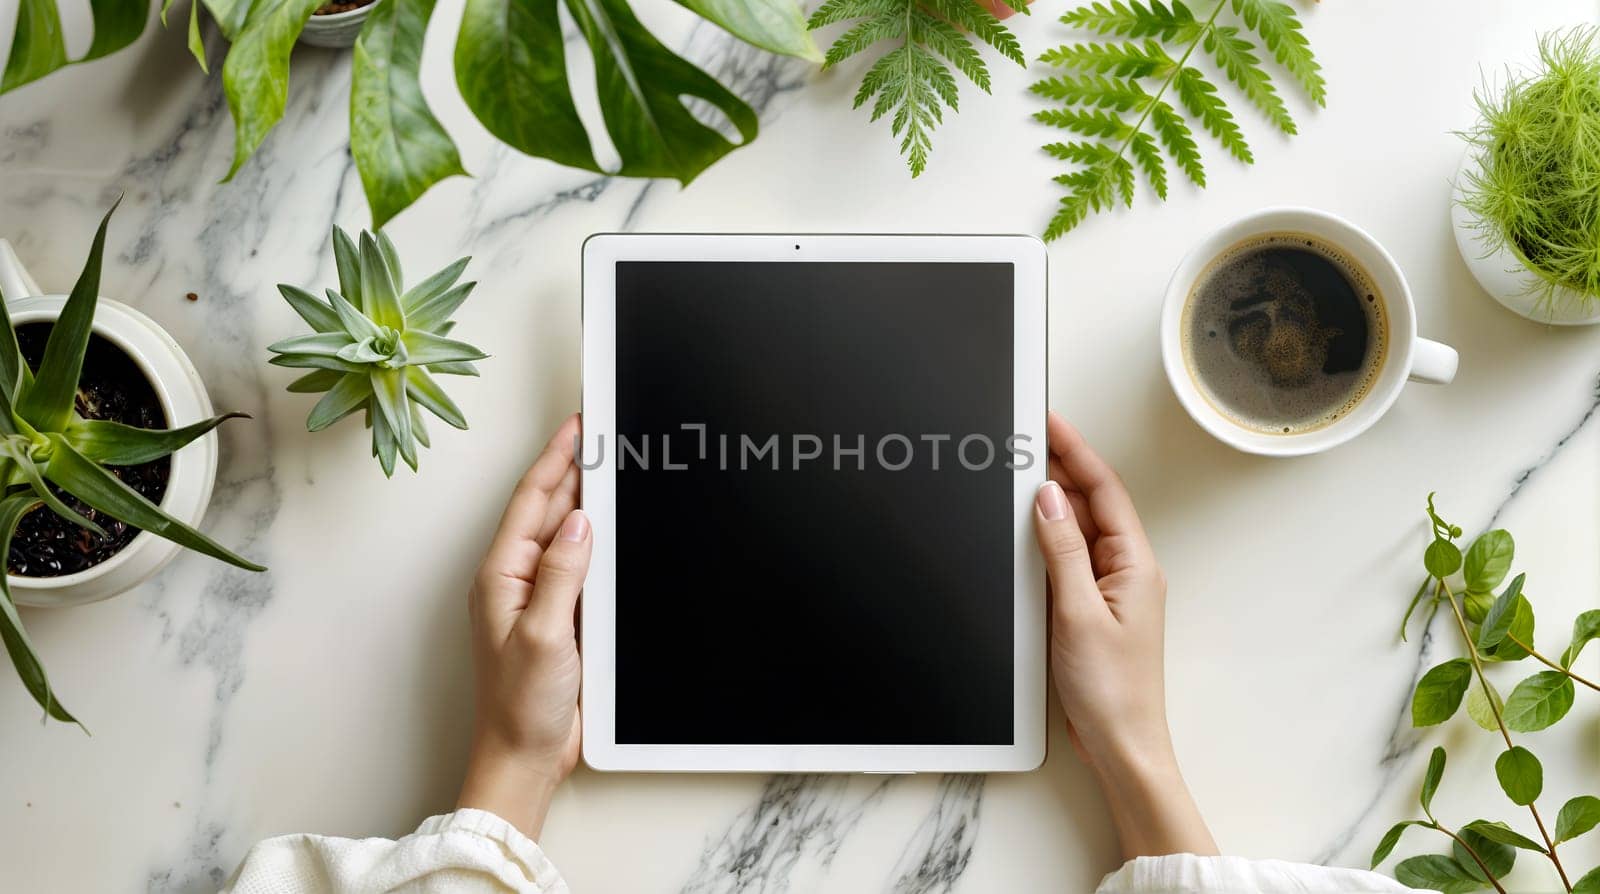 Hands holding tablet on a nature-inspired desk by chrisroll